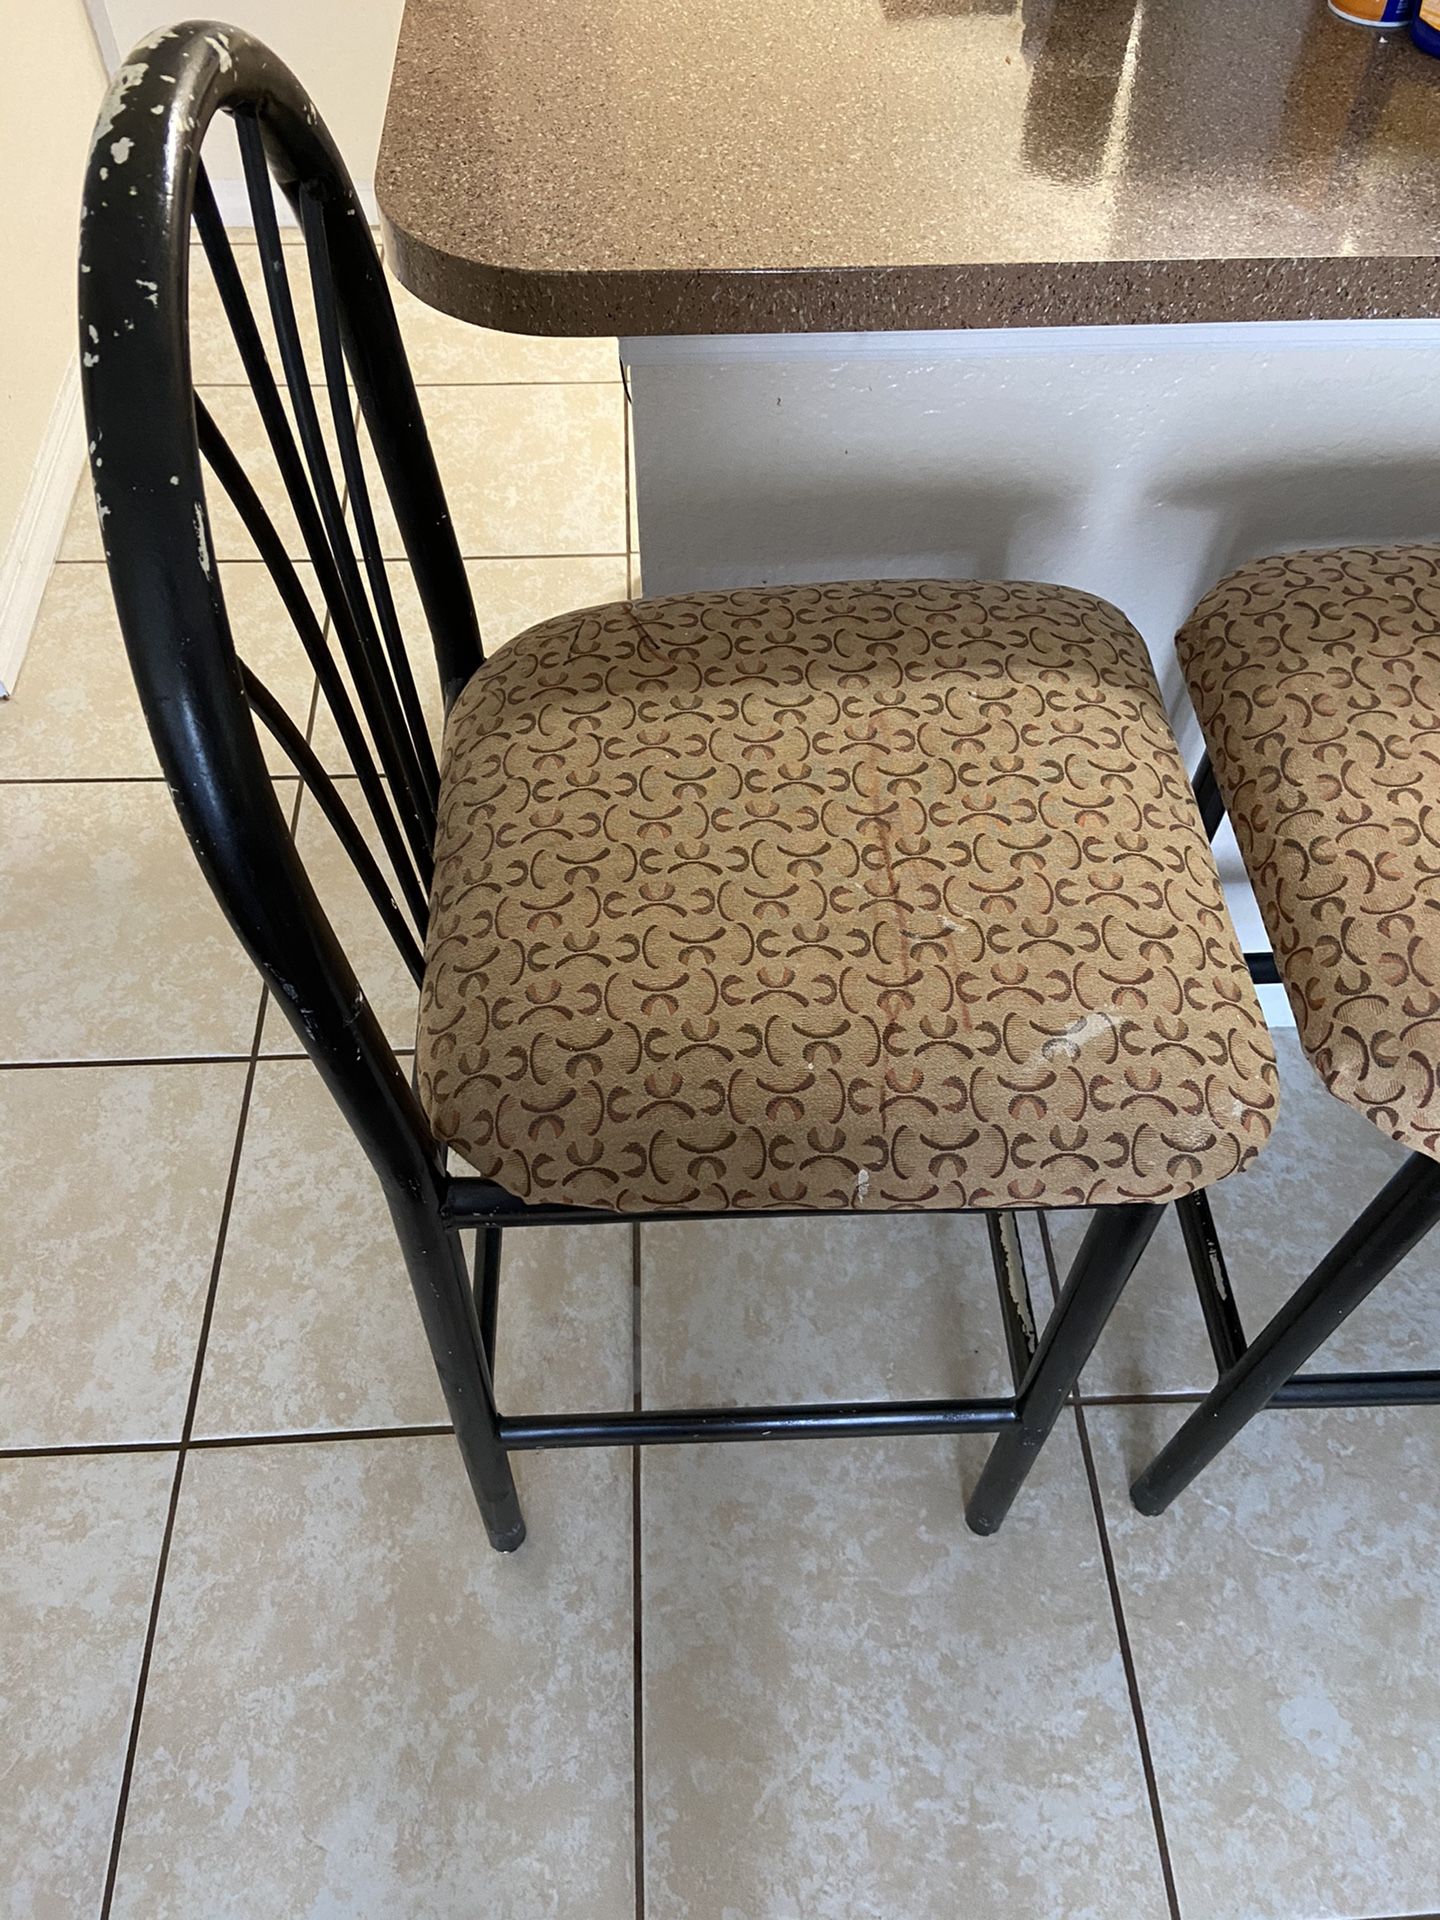 Chairs, Barstools, Or Kitchen Stools